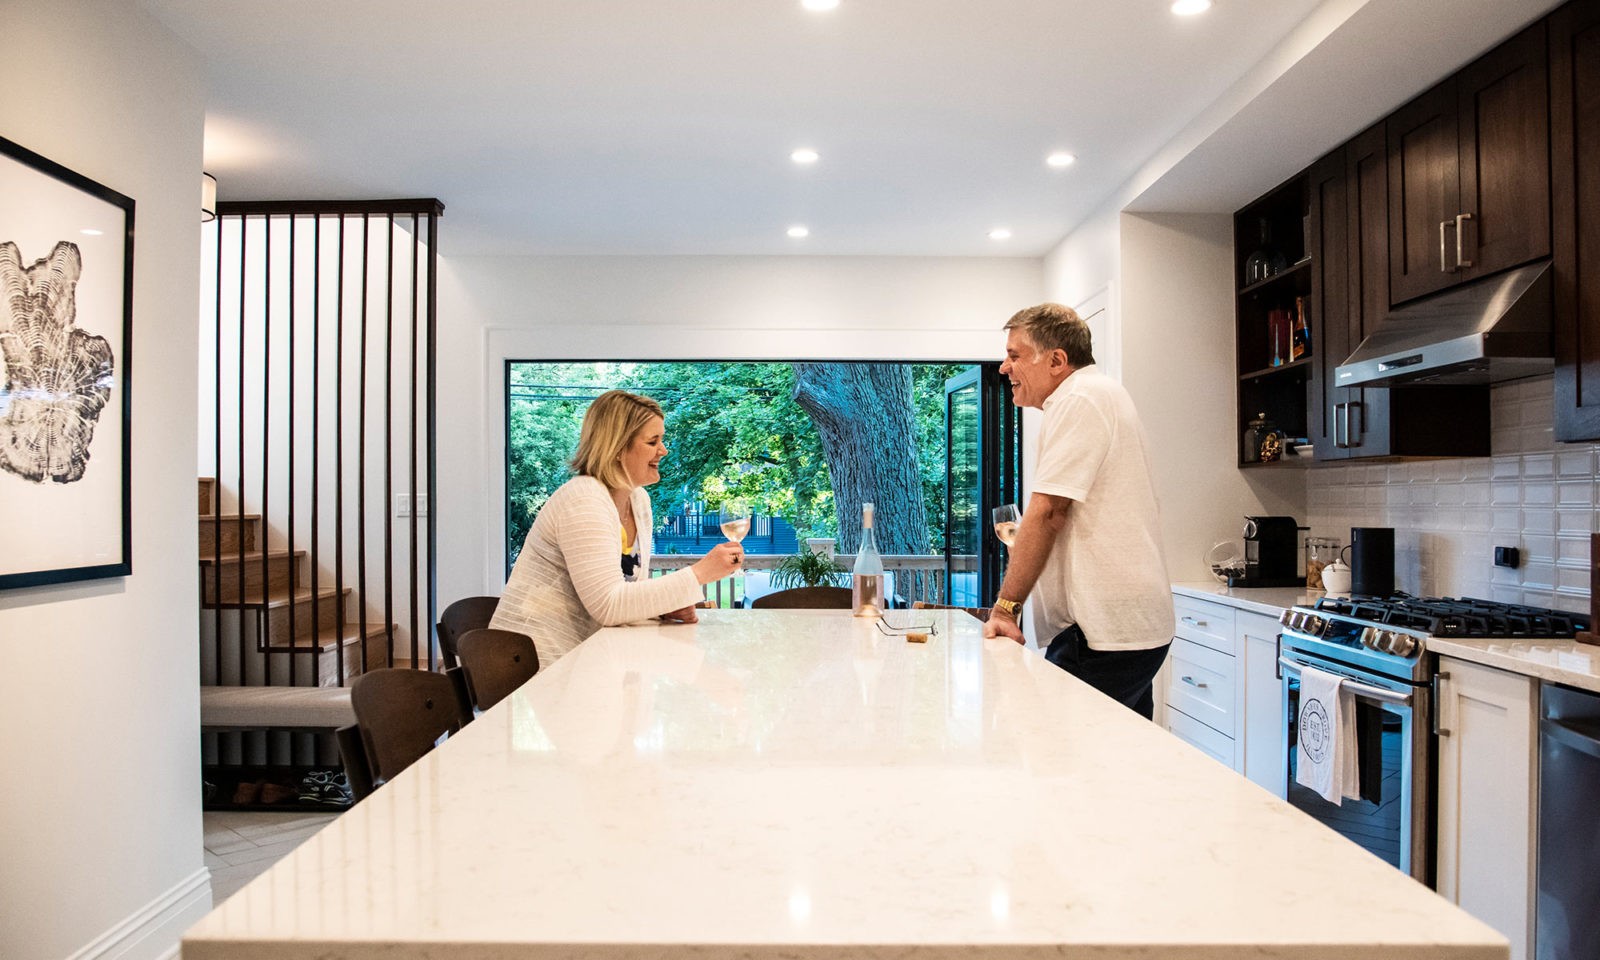 2 people drinking wine at a kitchen island in a newly renovated kitchen